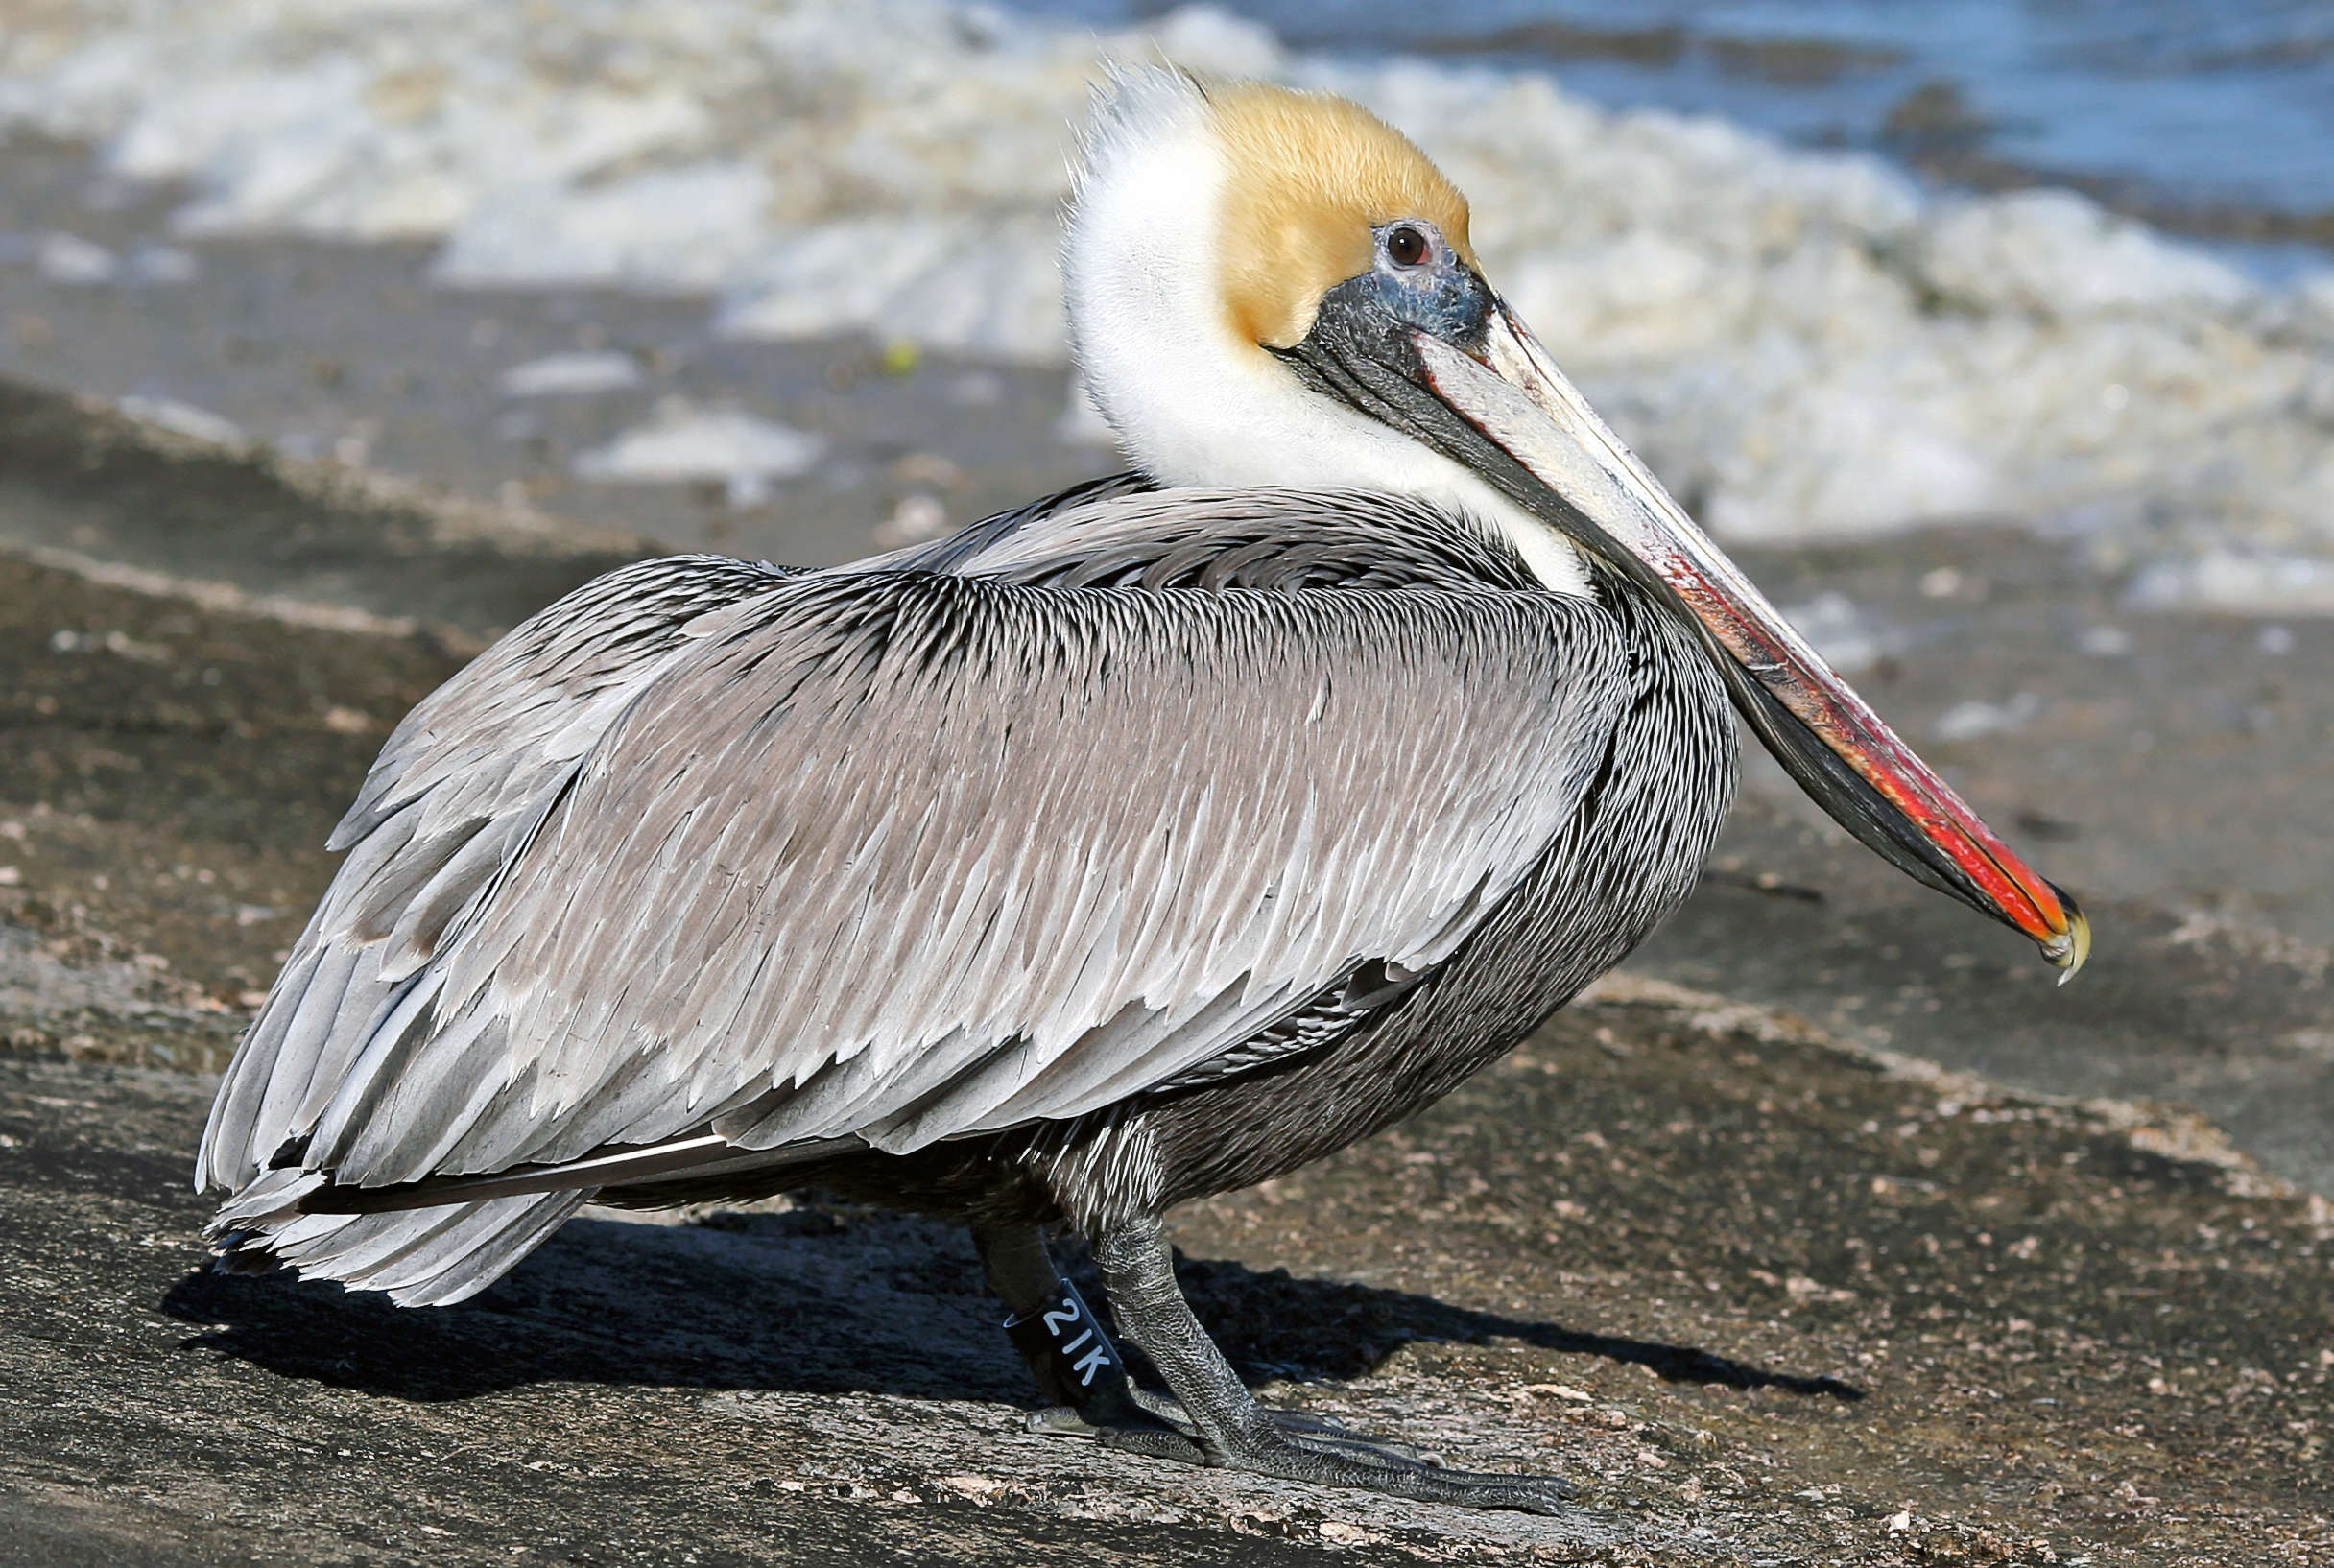 National Animal of Saint Kitts and Nevis - Brown pelican